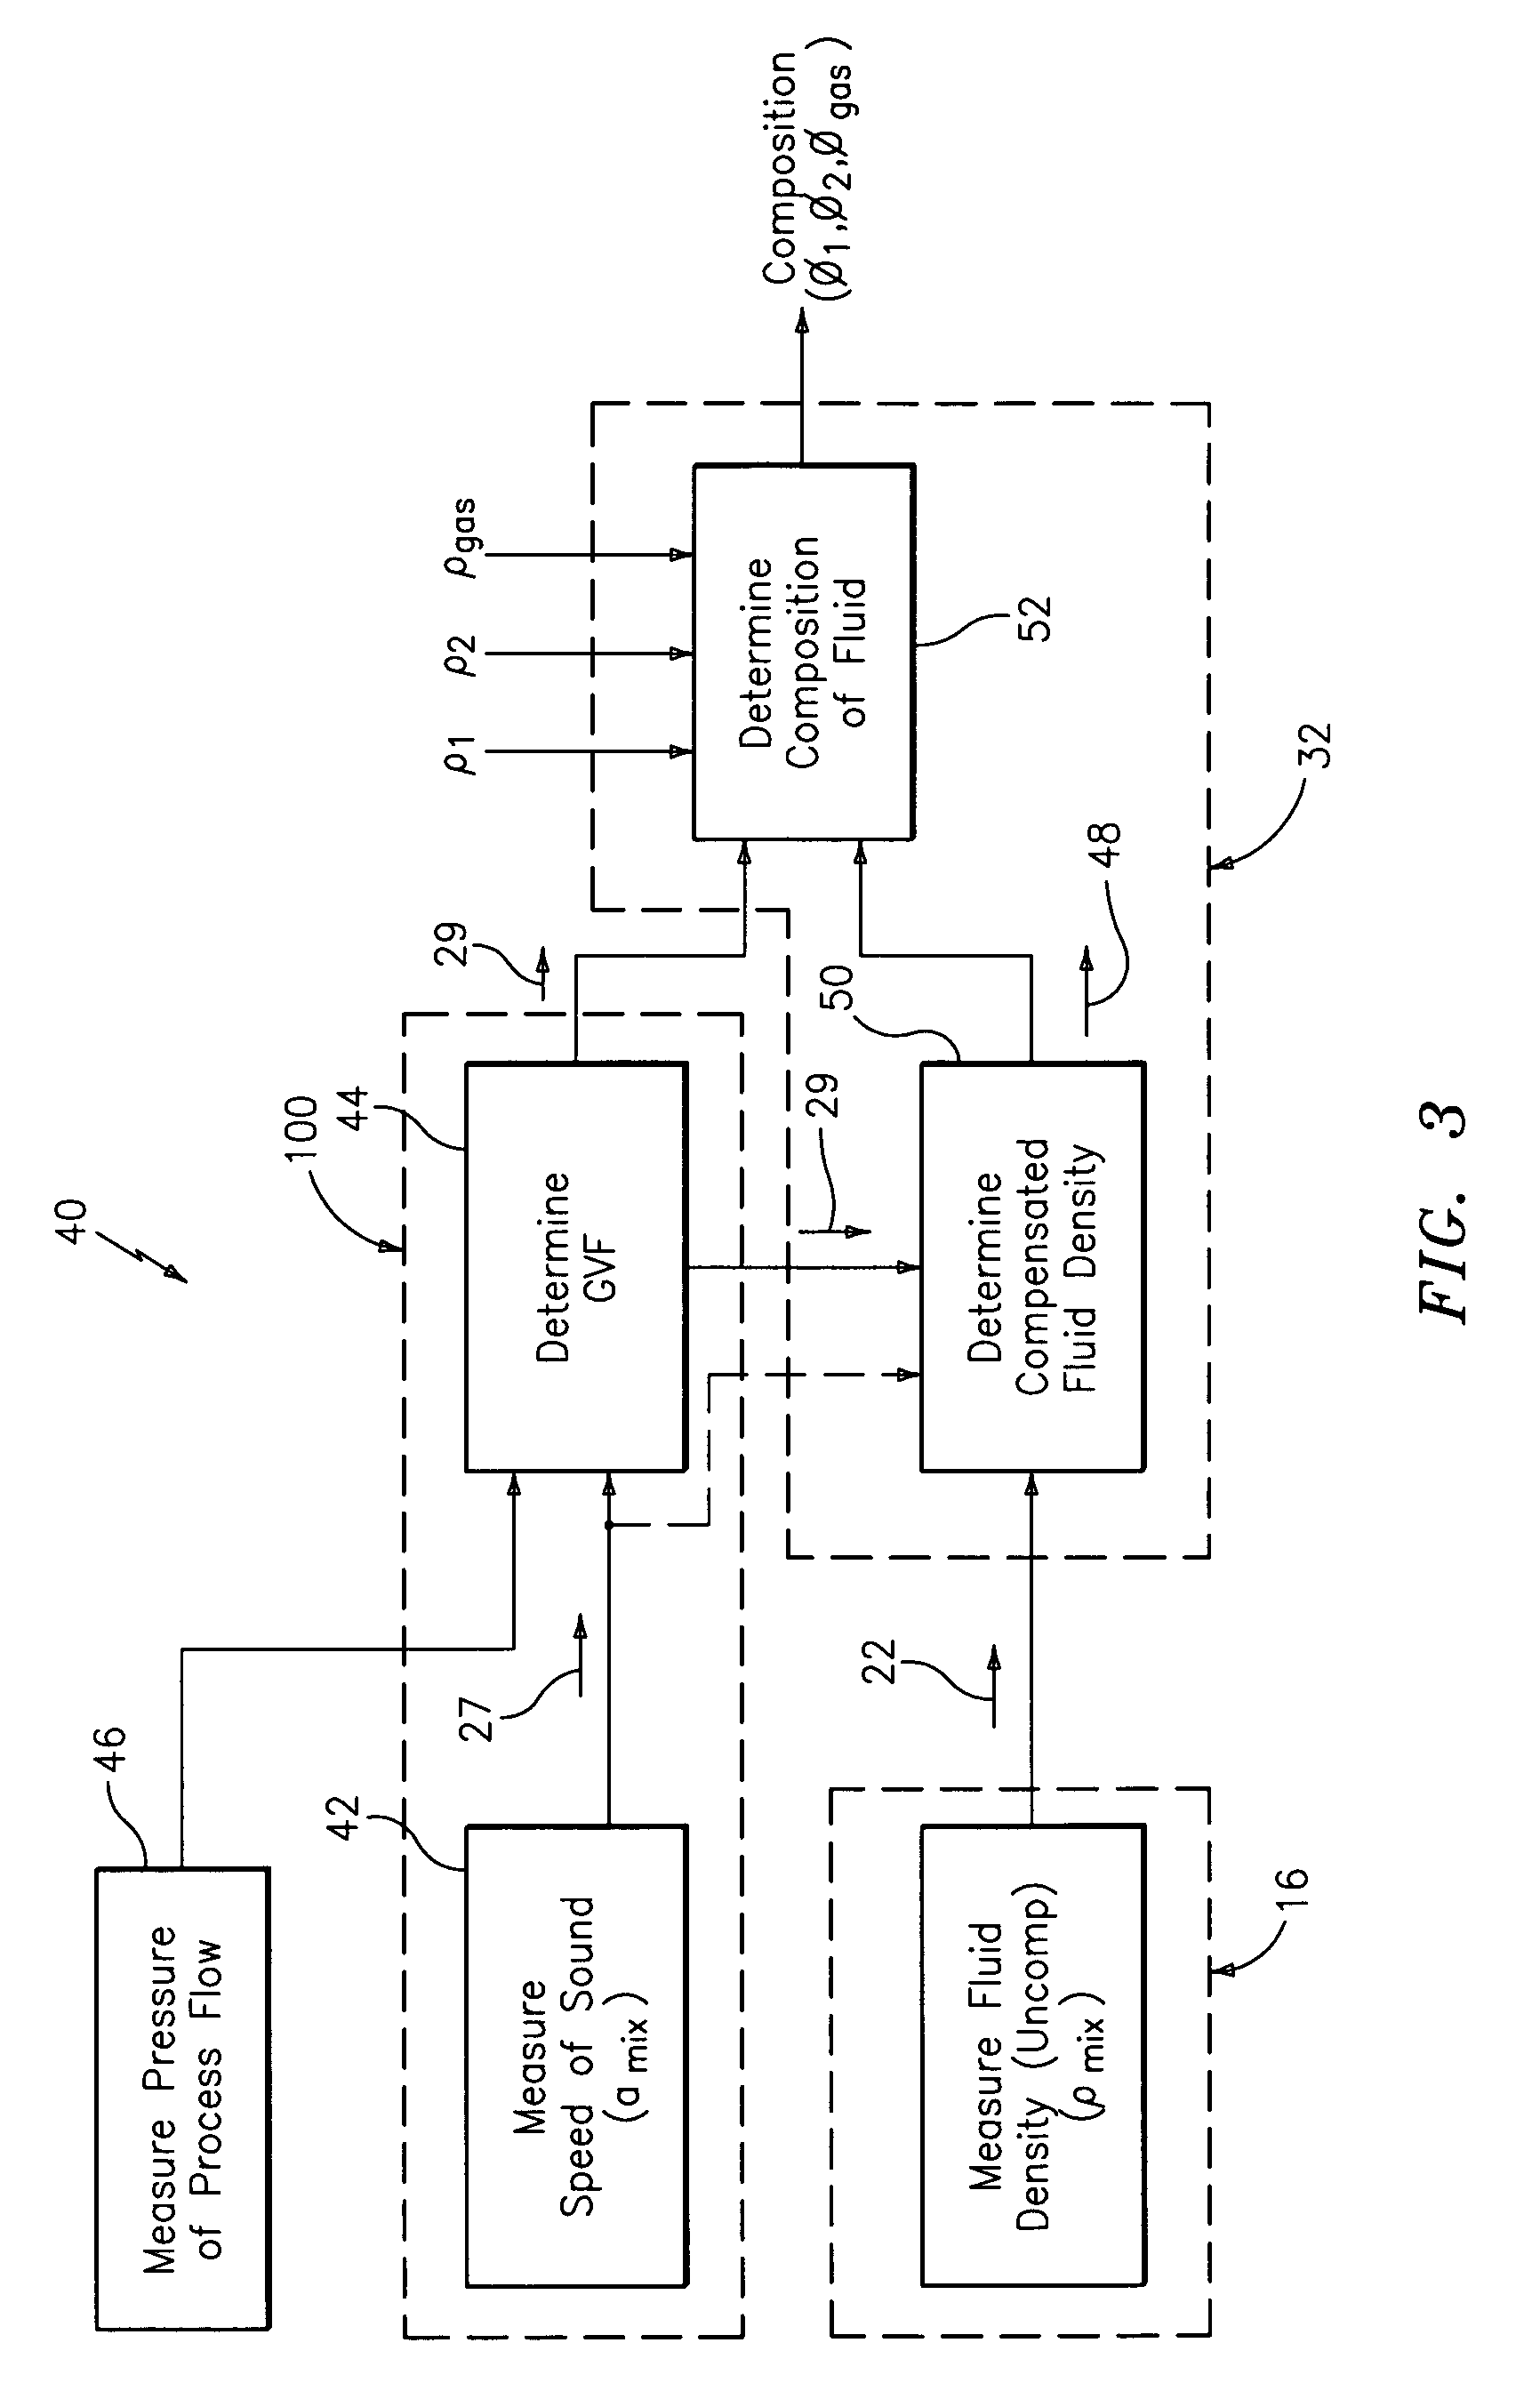 Apparatus and method for providing a density measurement augmented for entrained gas